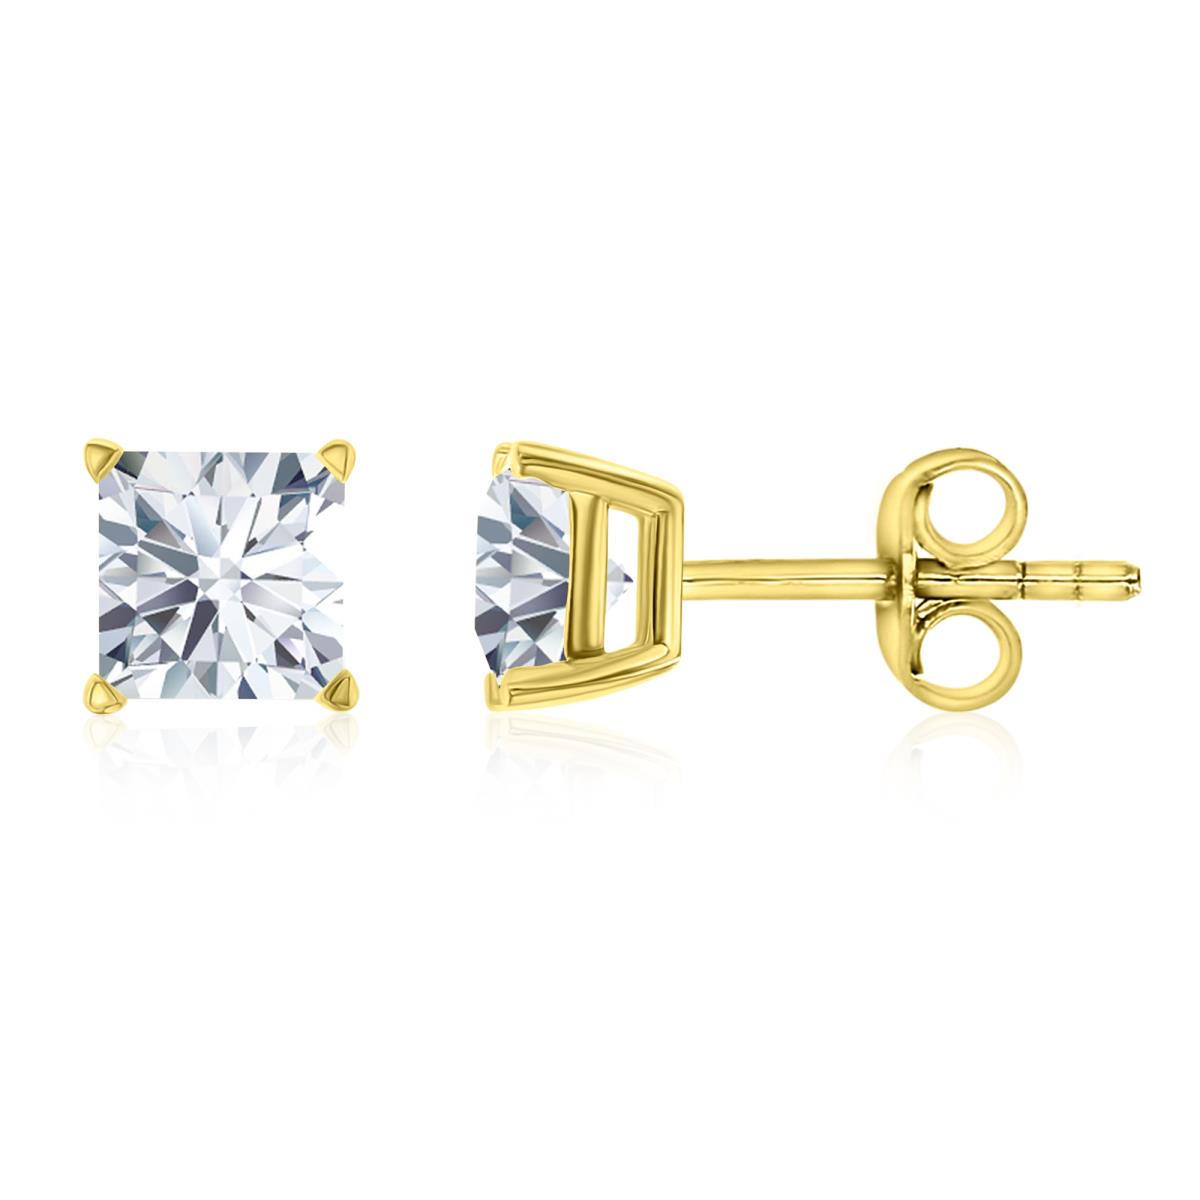 14K Yellow Gold 6mm Square Stud Earring